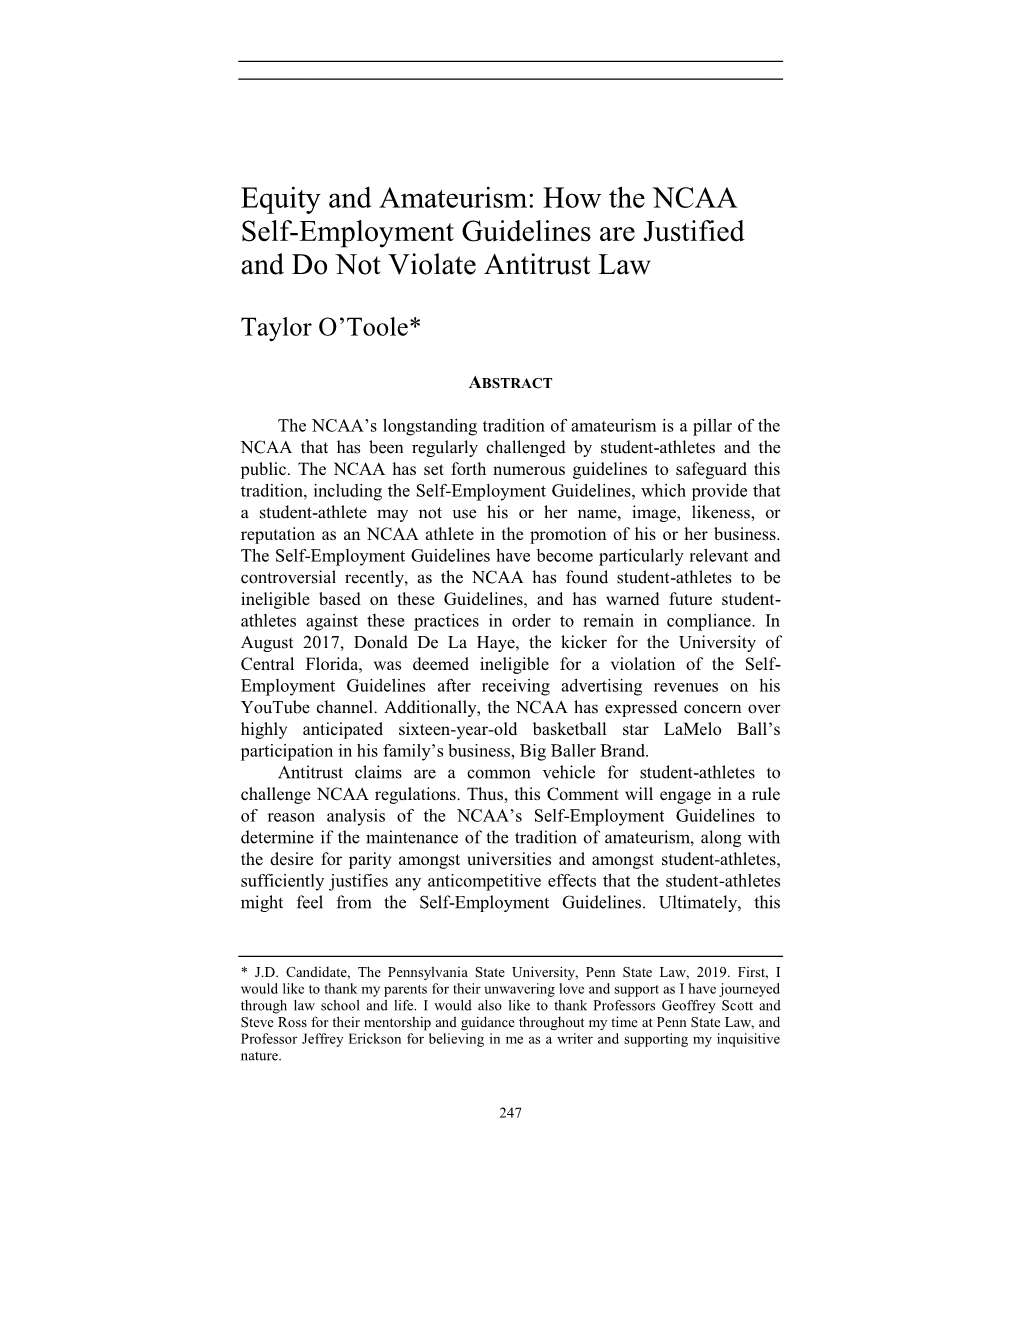 Equity and Amateurism: How the NCAA Self-Employment Guidelines Are Justified and Do Not Violate Antitrust Law